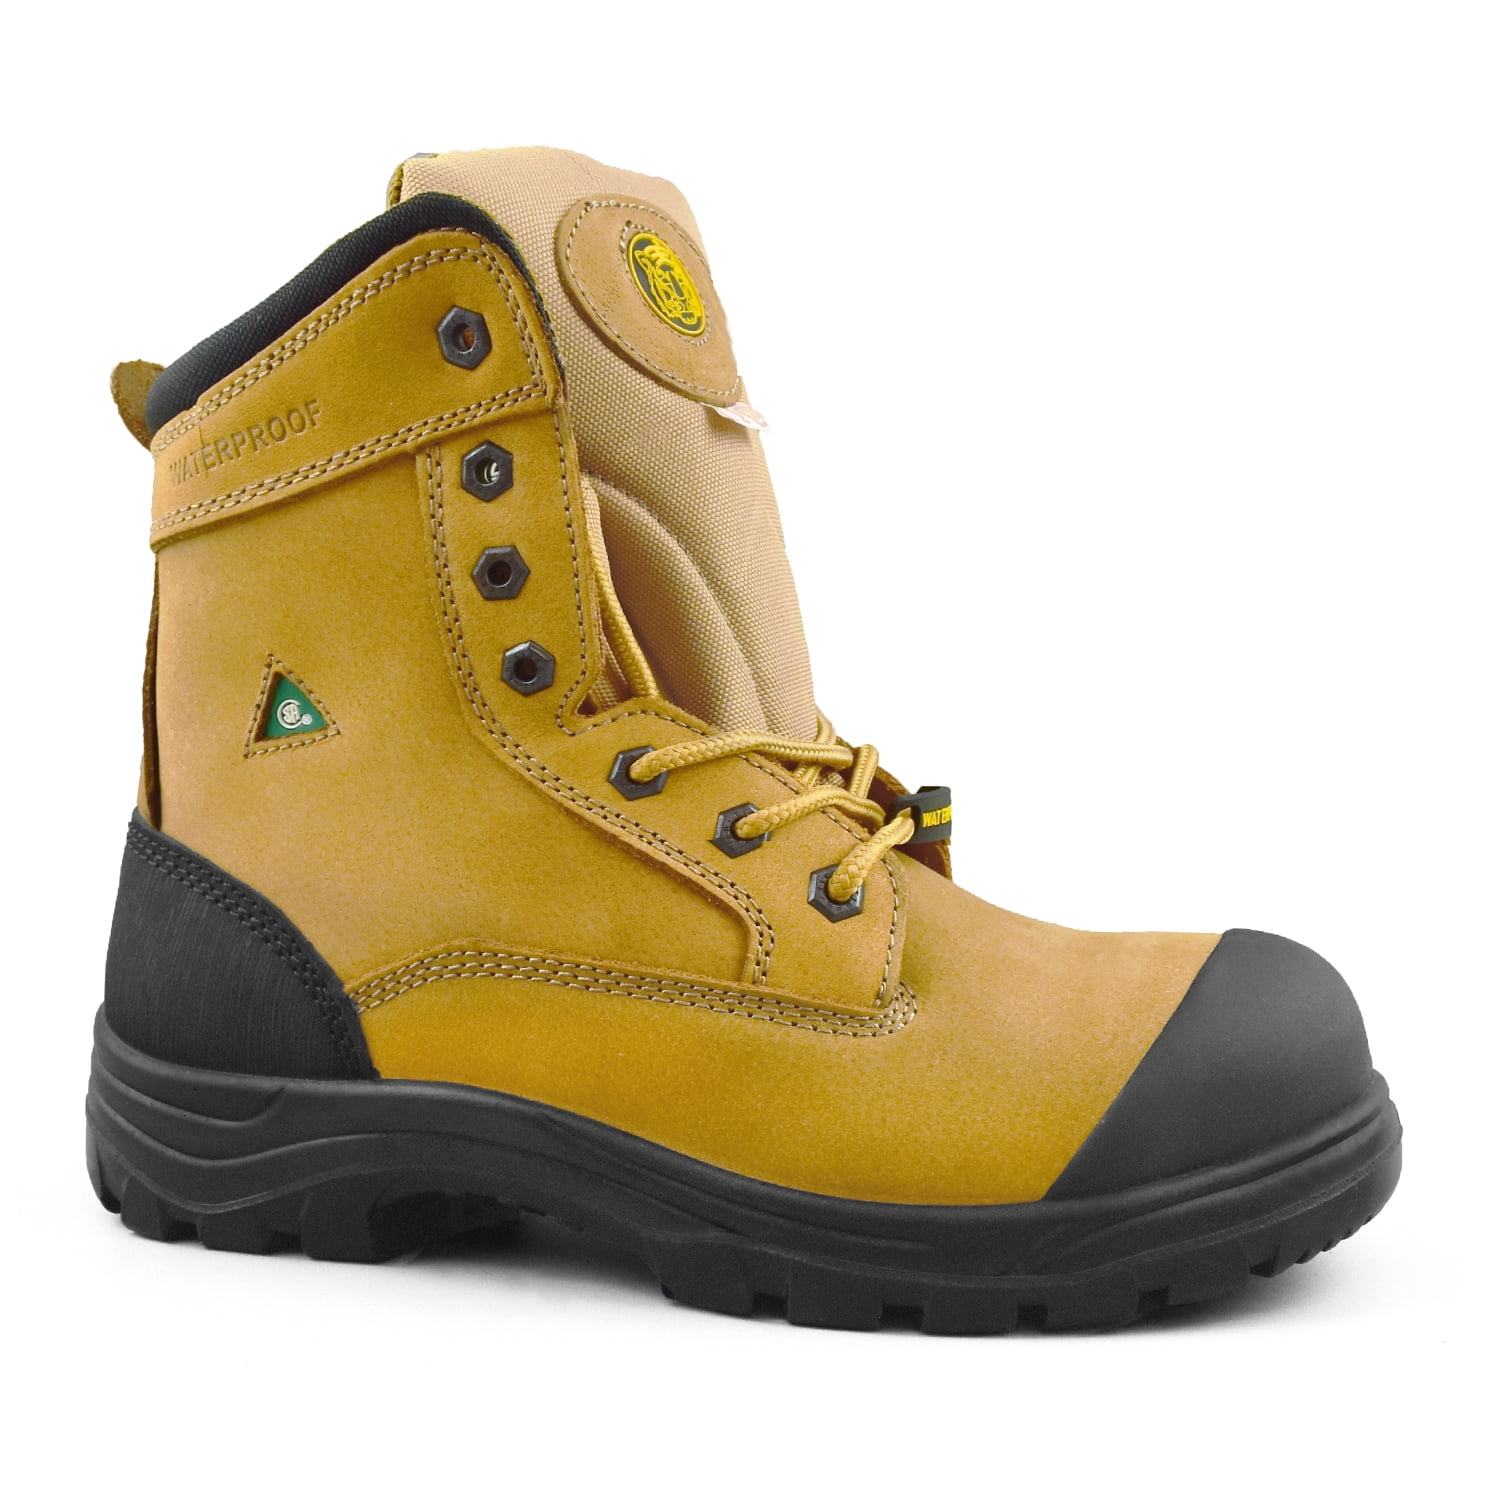 csa approved steel toe safety shoes